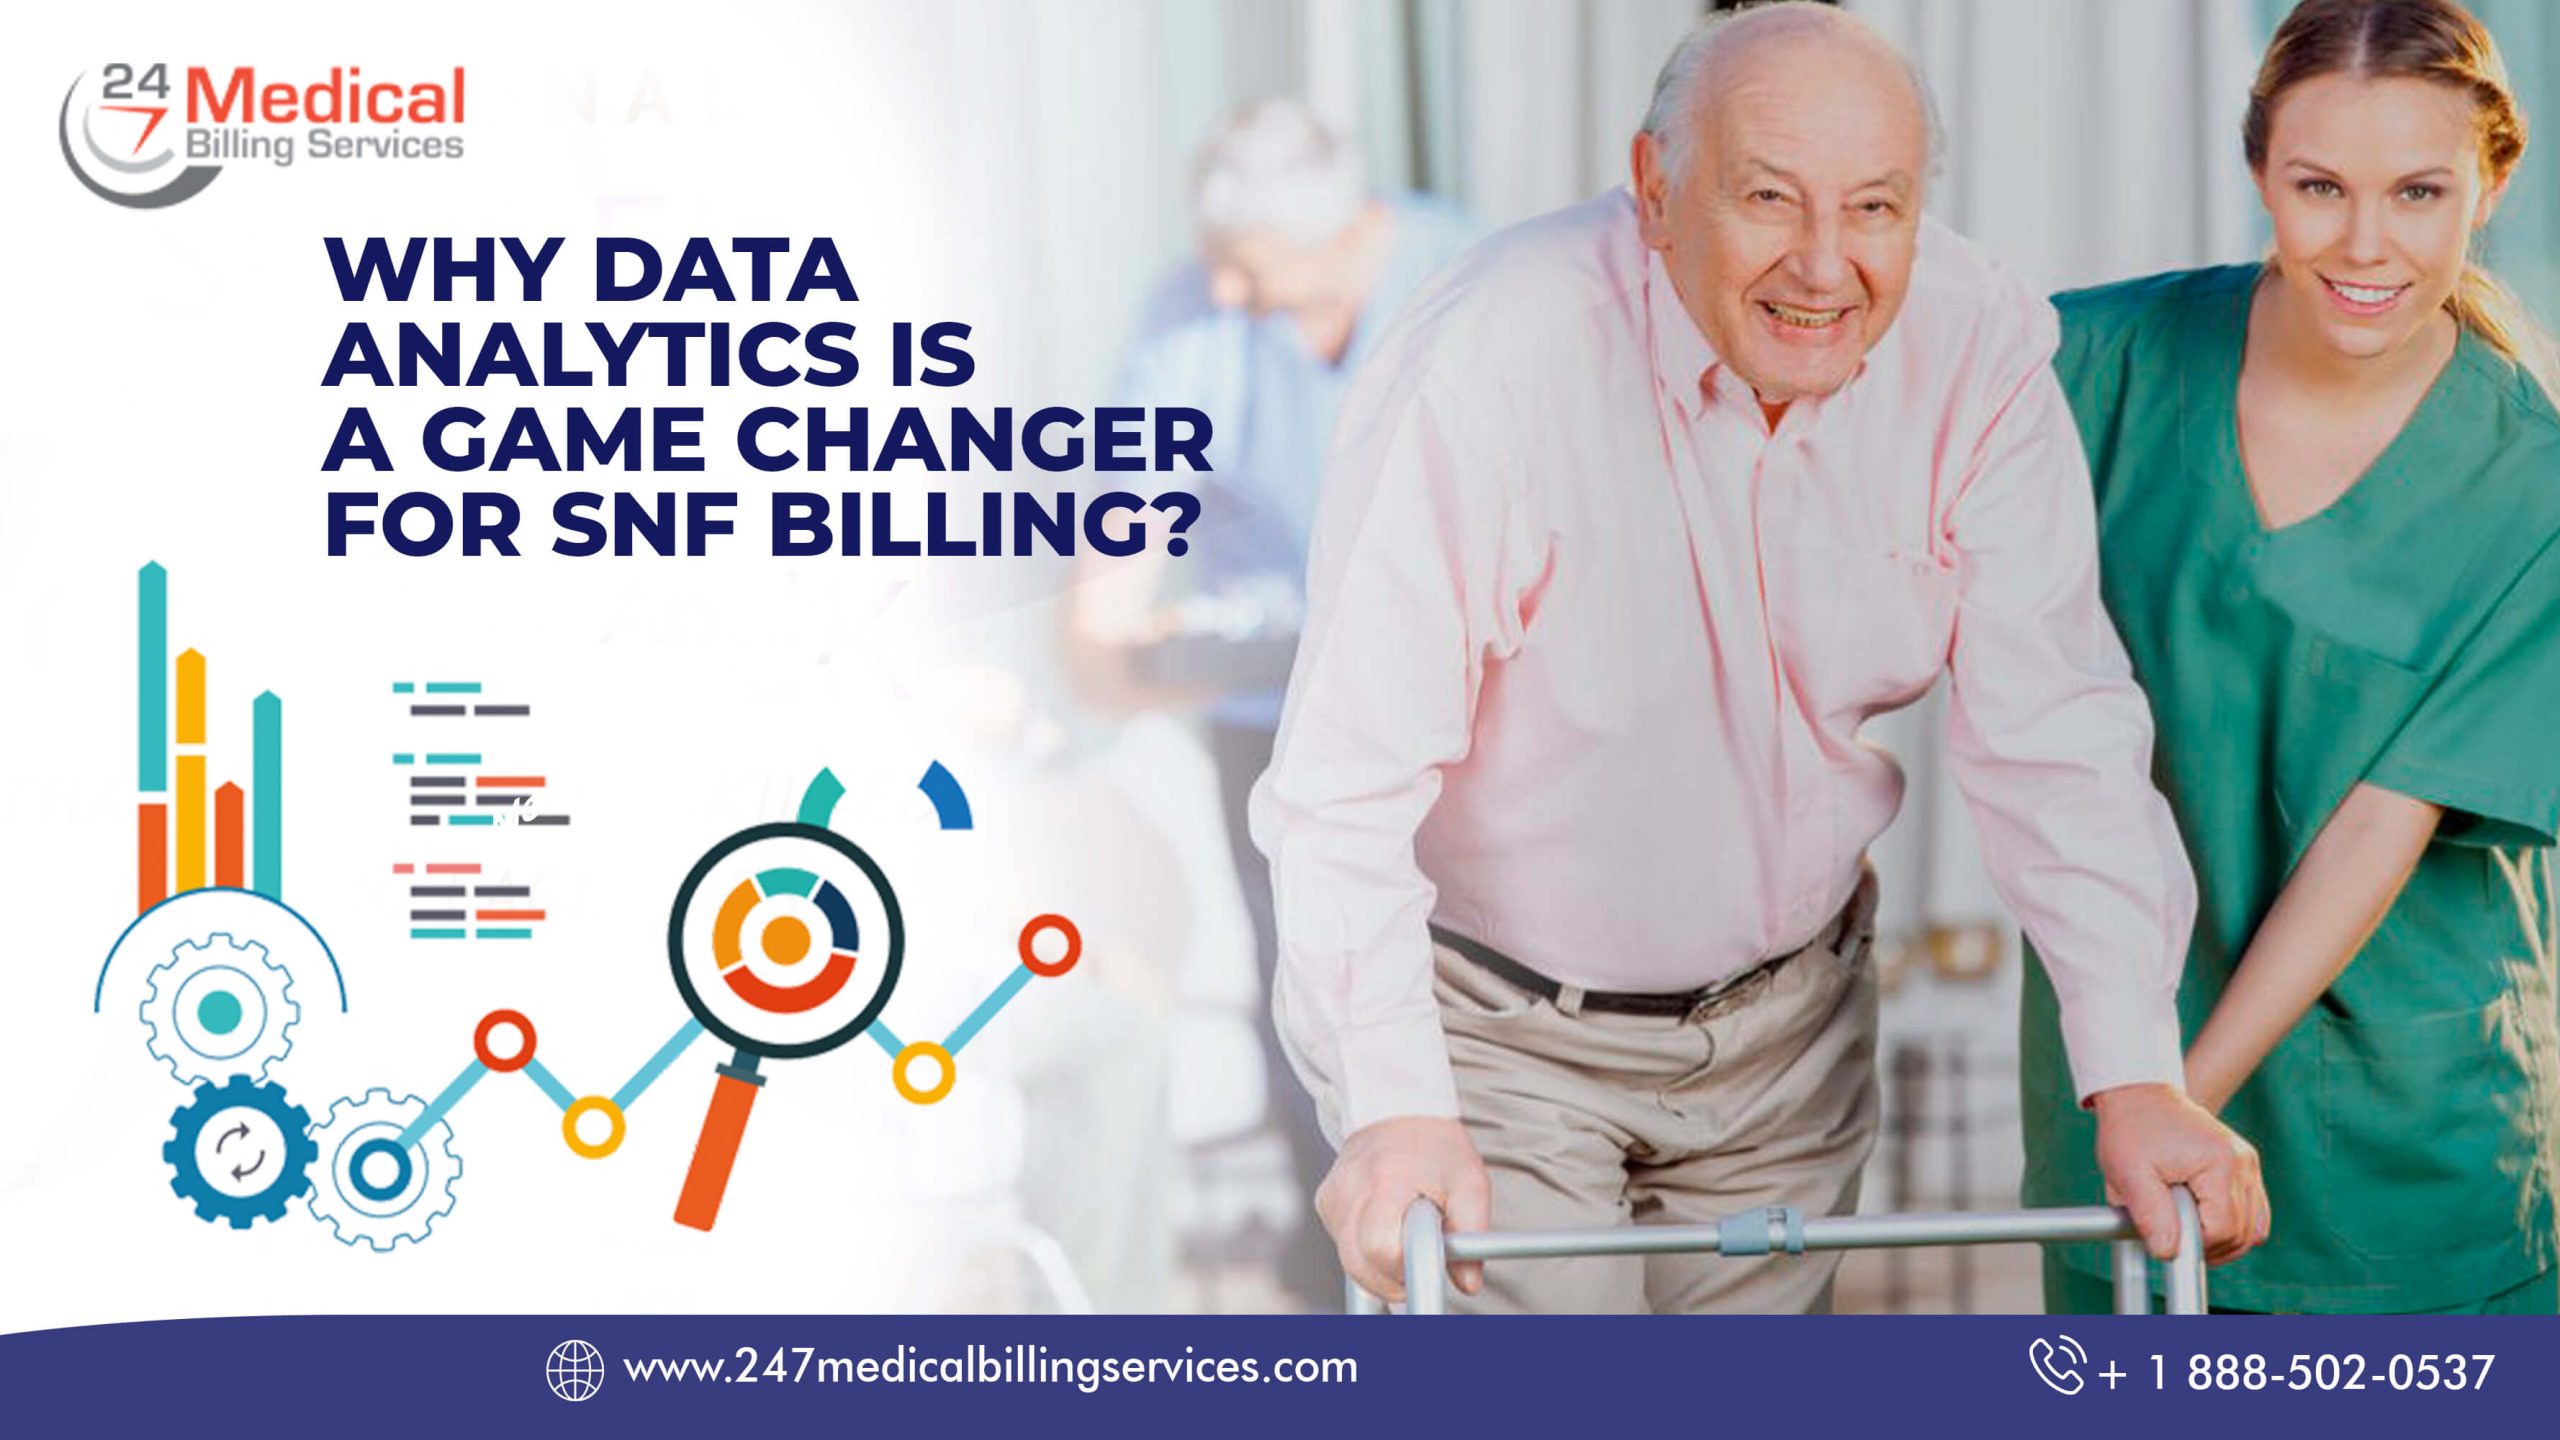  Why Data Analytics is a Game Changer for SNF Billing?